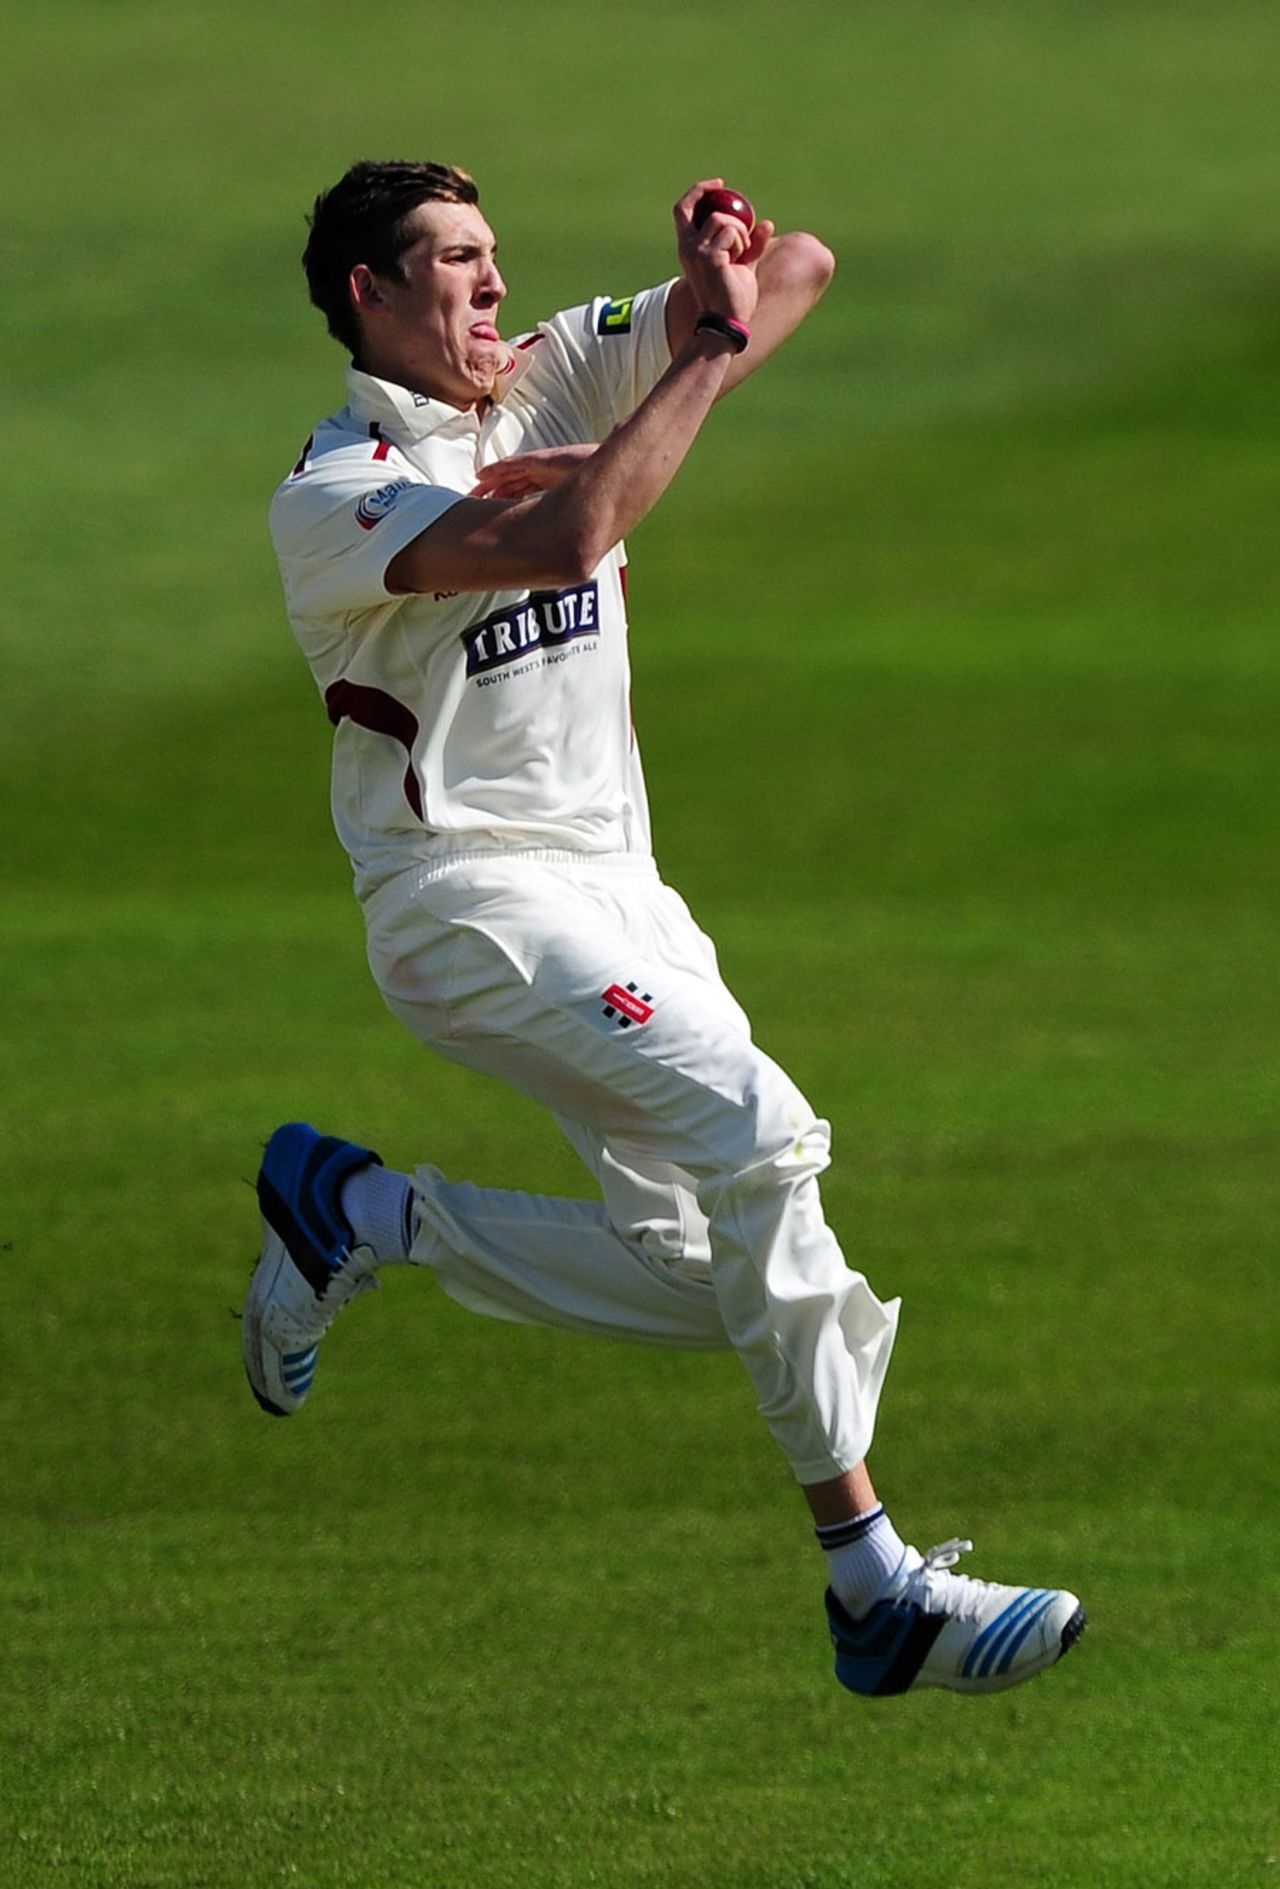 Craig Overton removed Adam Lyth, Somerset v Yorkshire, County Championship Division One, Taunton, 1st day, April 13, 2014